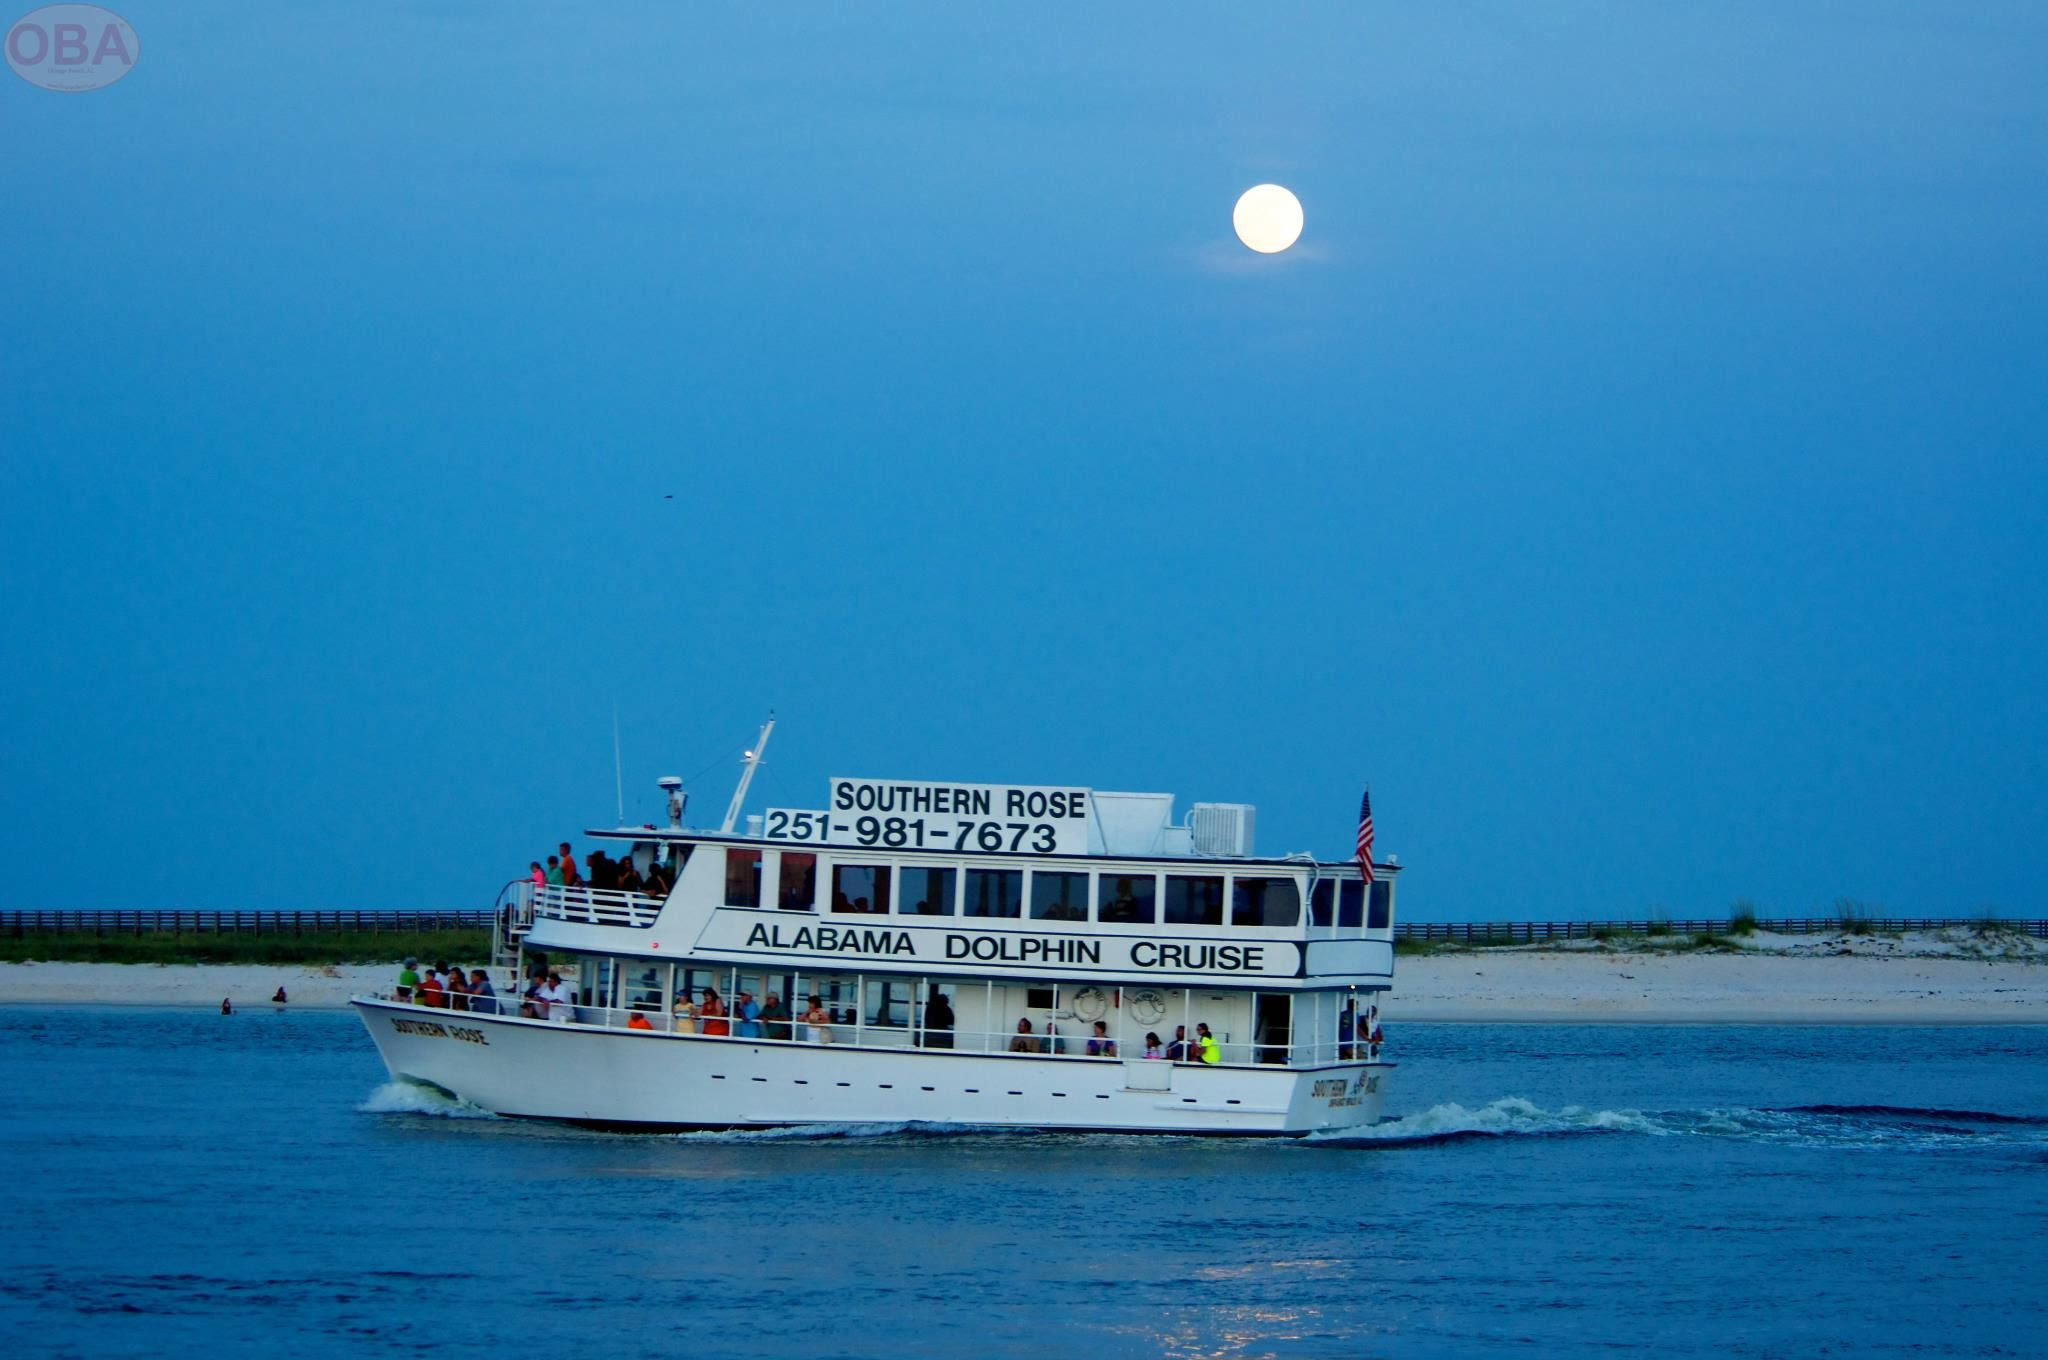 Picture yourself under a full moon cruising the clear blue gulf waters